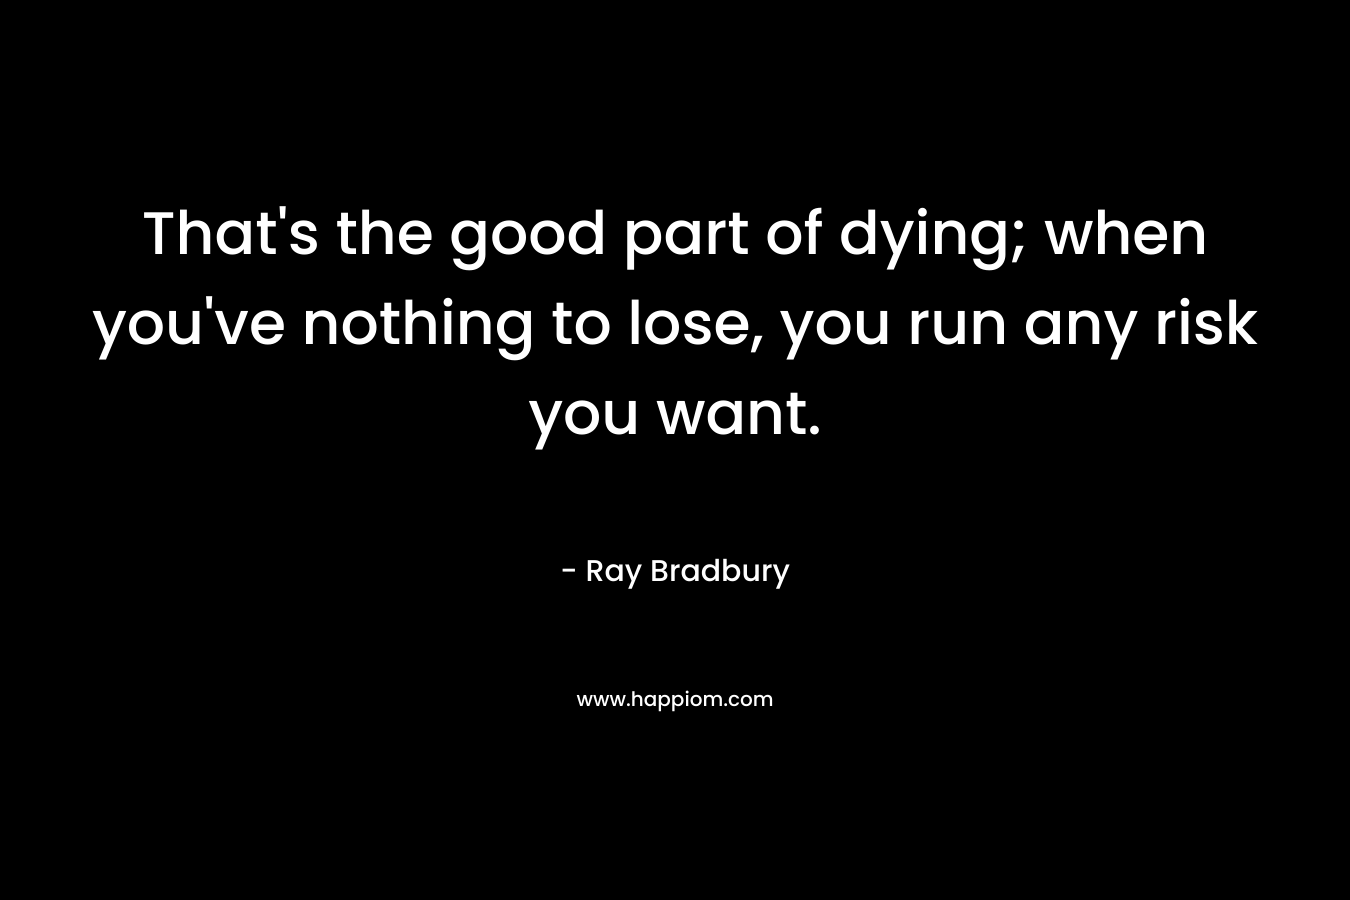 That’s the good part of dying; when you’ve nothing to lose, you run any risk you want. – Ray Bradbury